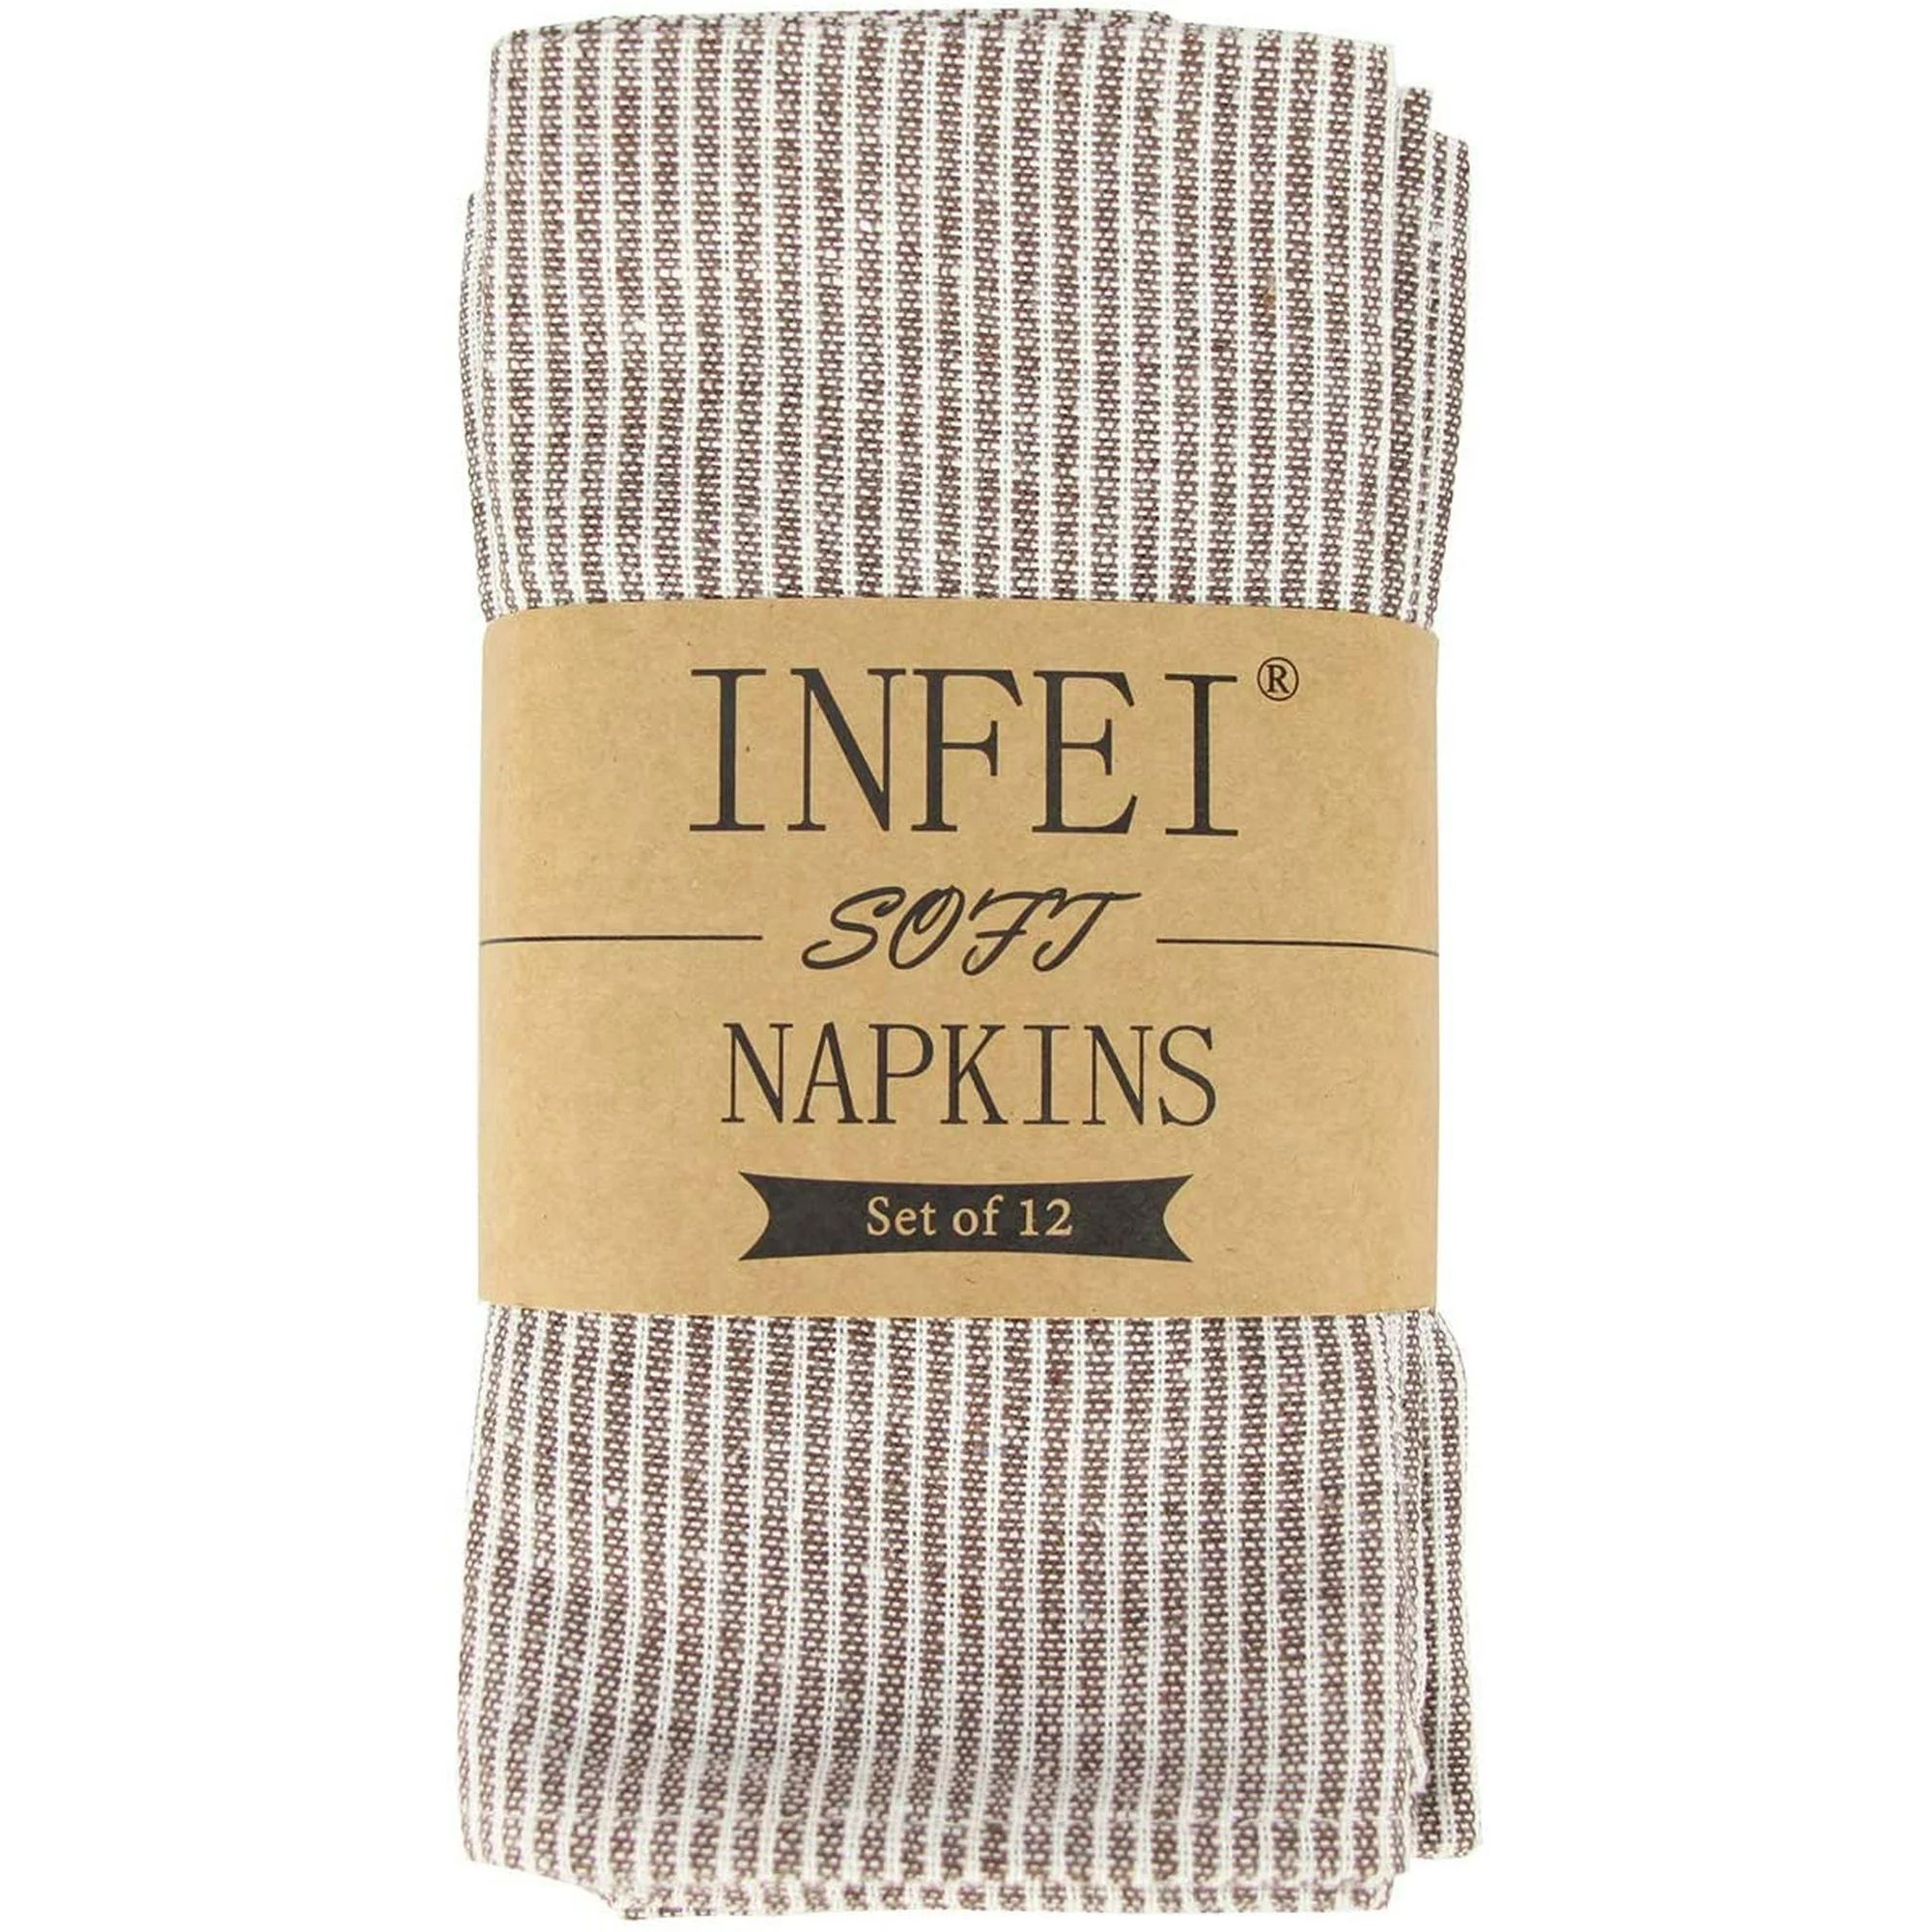 Narrow Striped Linen Cotton Dinner Cloth Napkins - Set of 12 (40 x 40 cm) - for Events & Home Use... | Walmart (US)